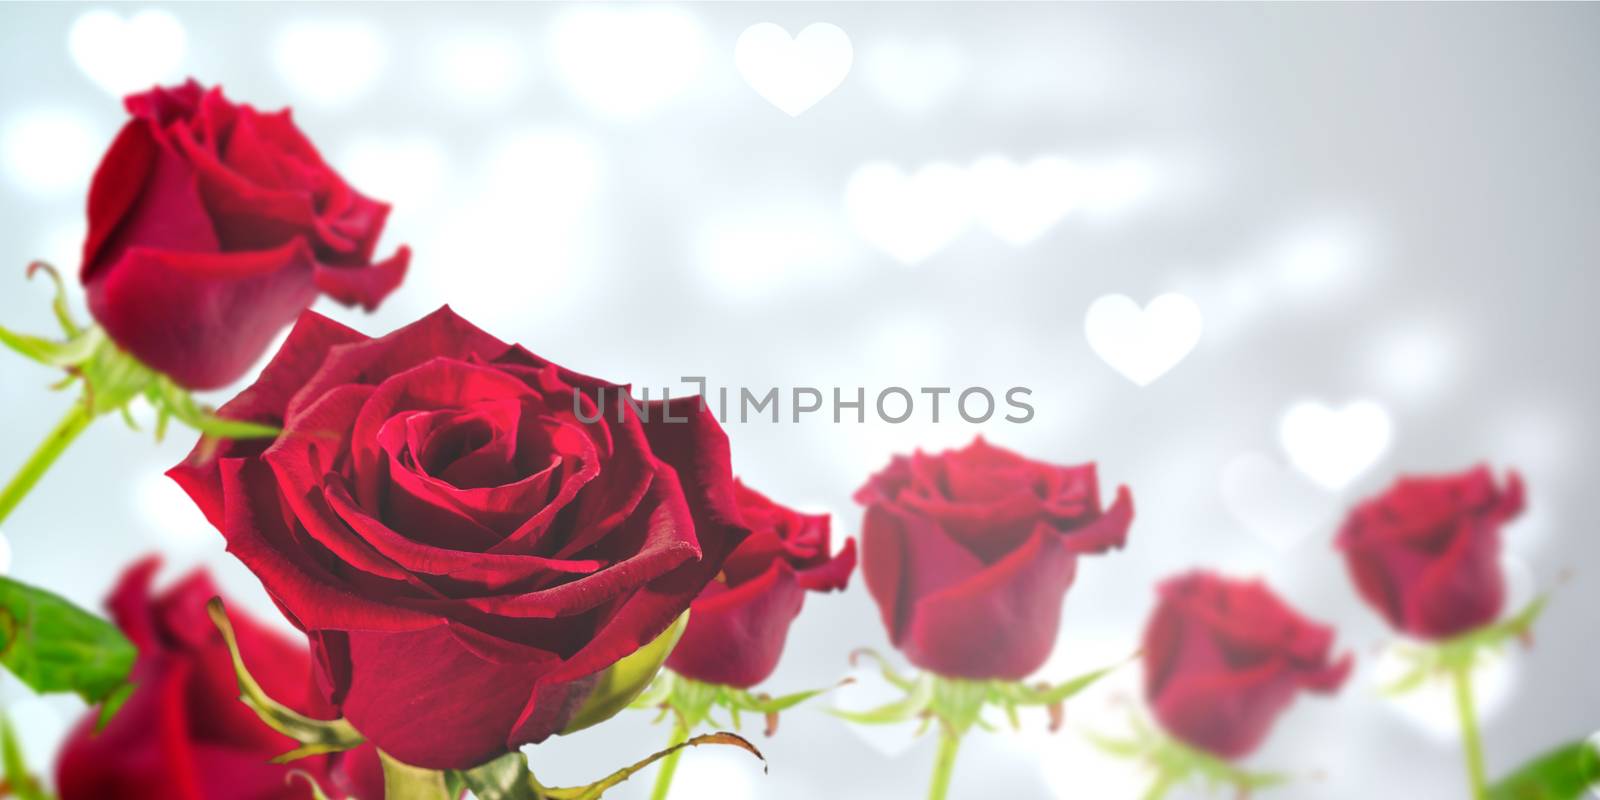 Composite image of red rose by Wavebreakmedia